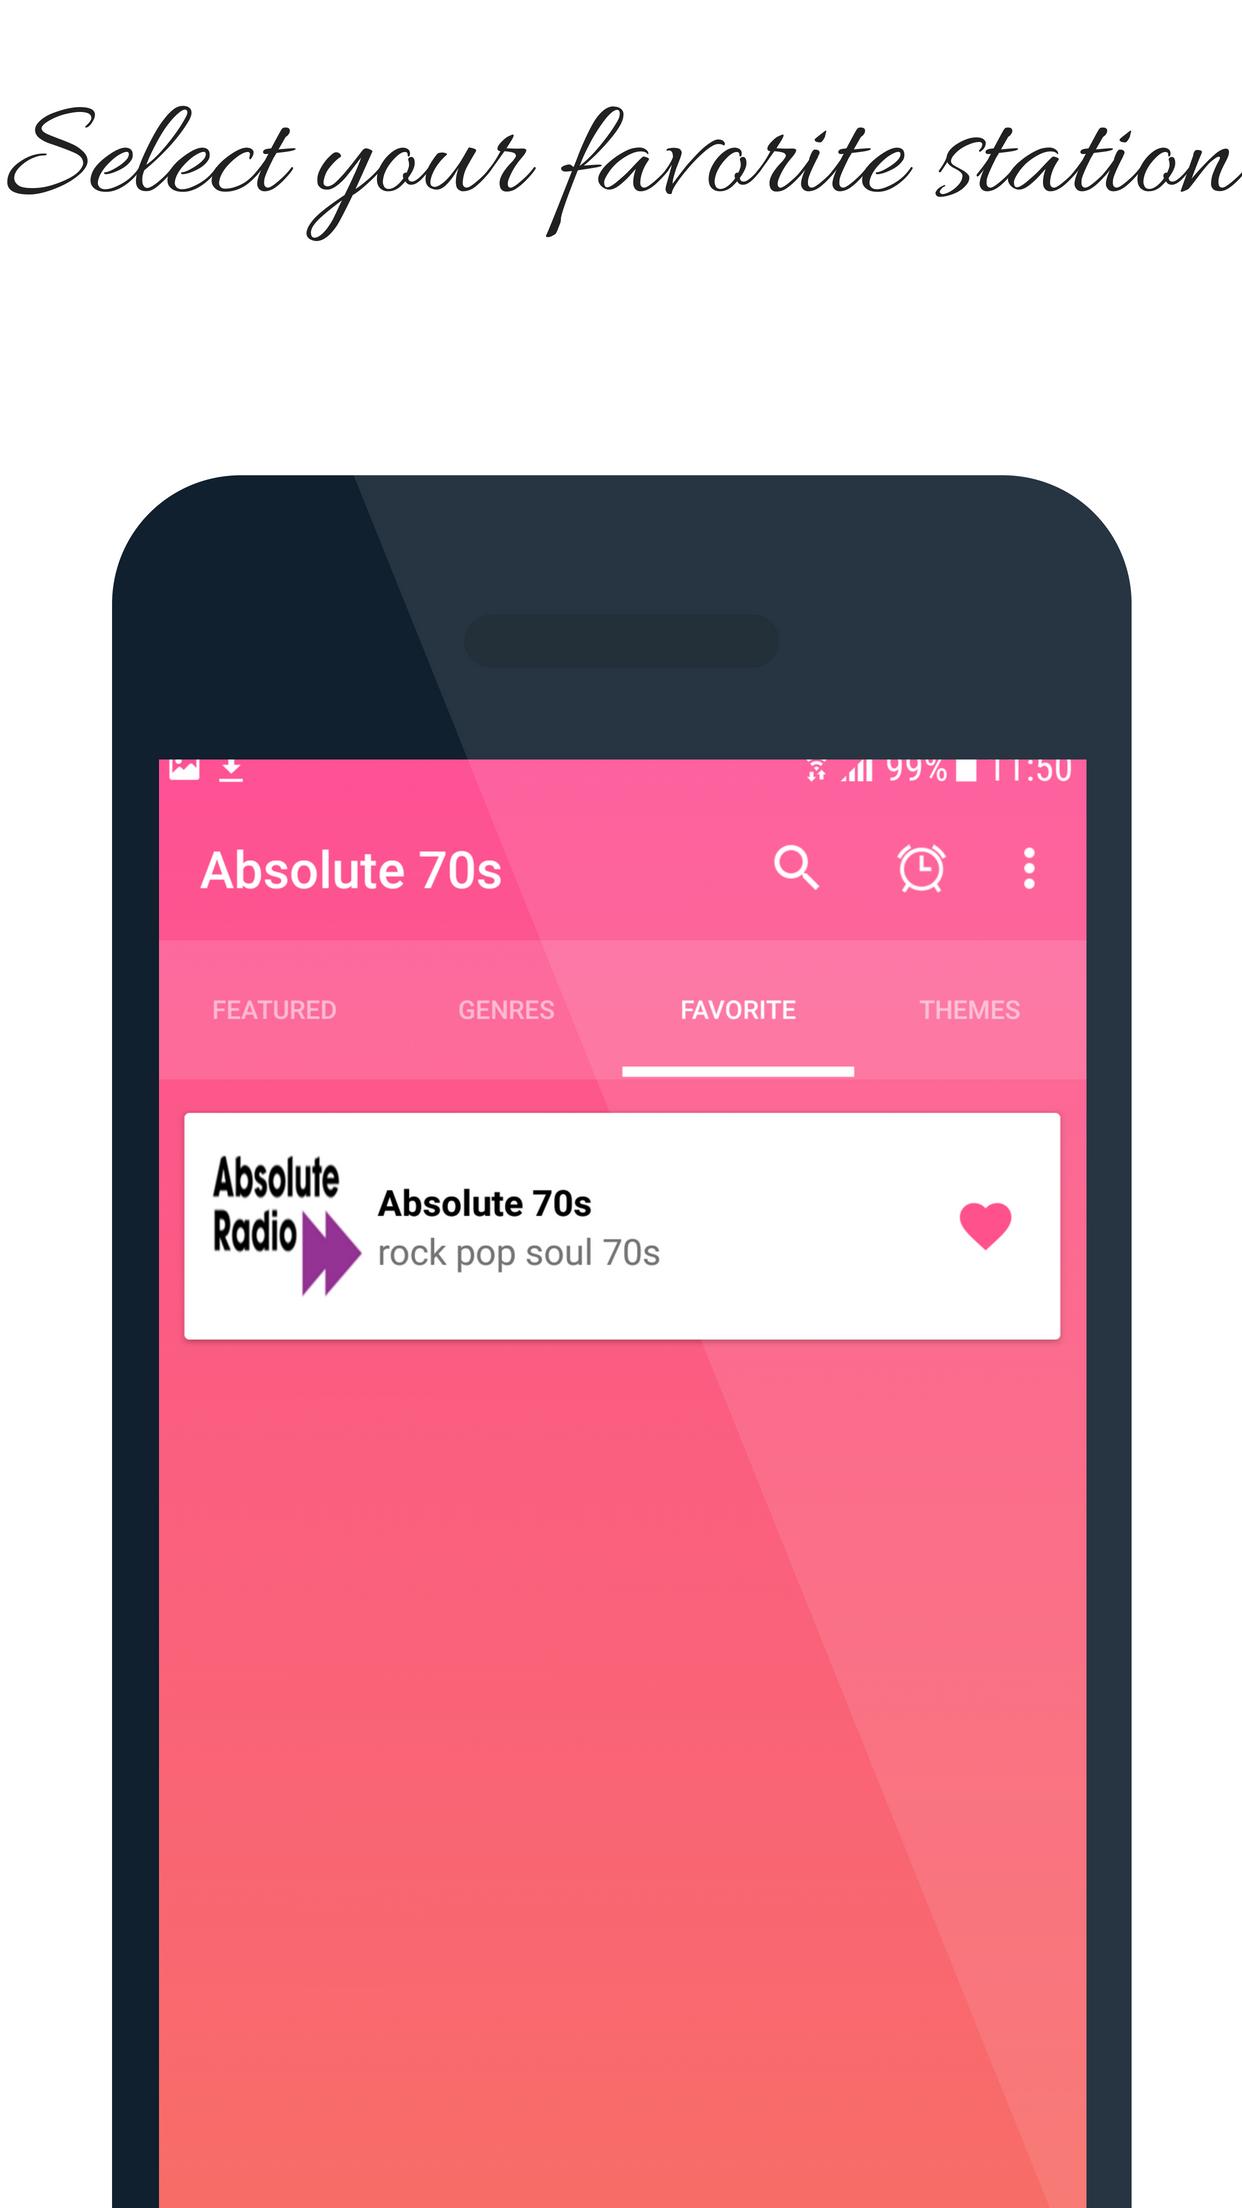 Absolute 70s Radio App Station Uk for Android - APK Download